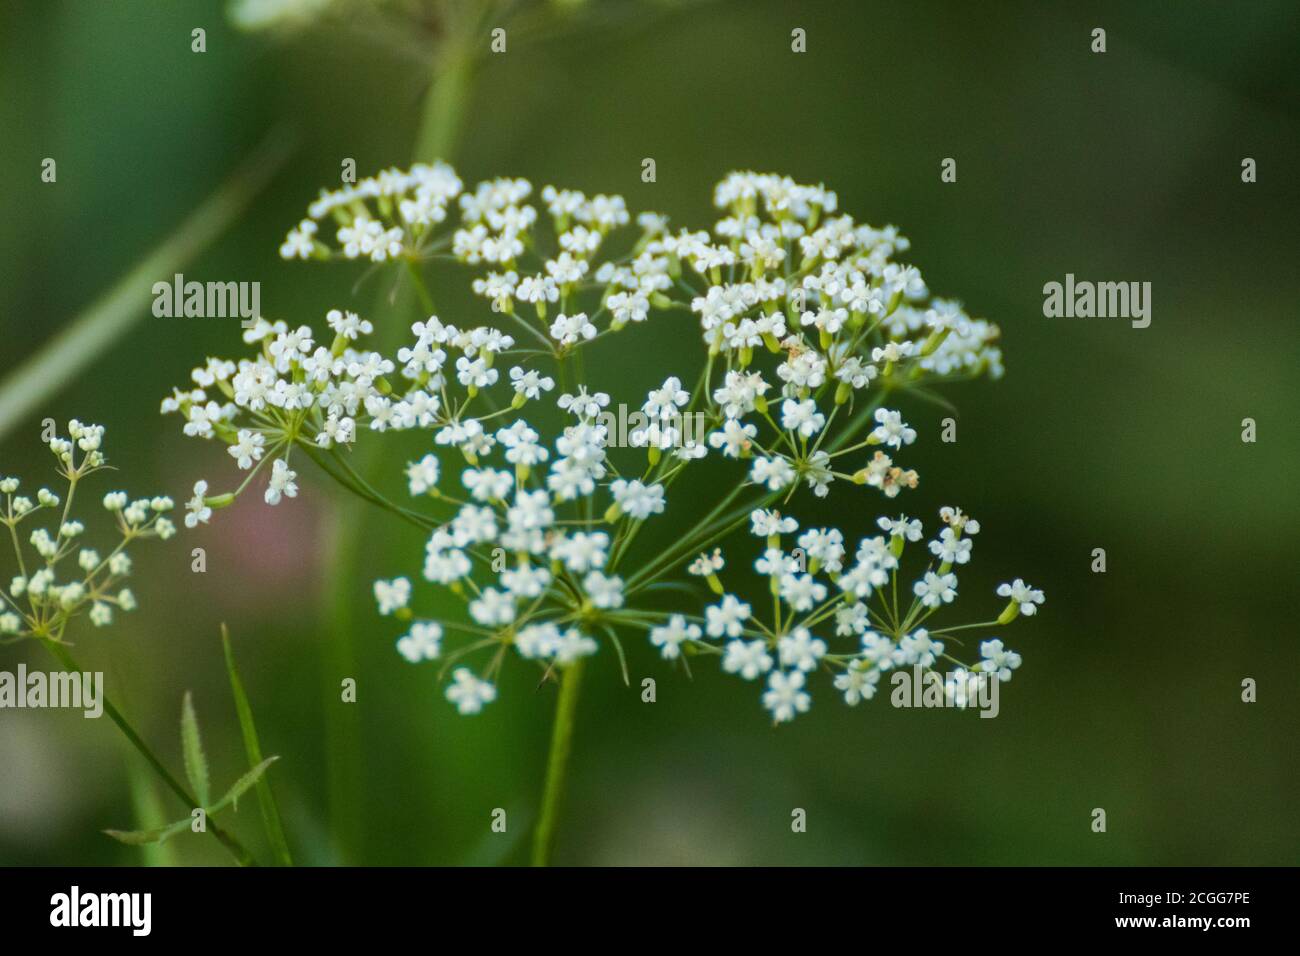 Macro of blooming white Pimpinella Saxifraga or burnet-saxifrage flowers plant with blurred background. Natural wild lawn close-up Stock Photo